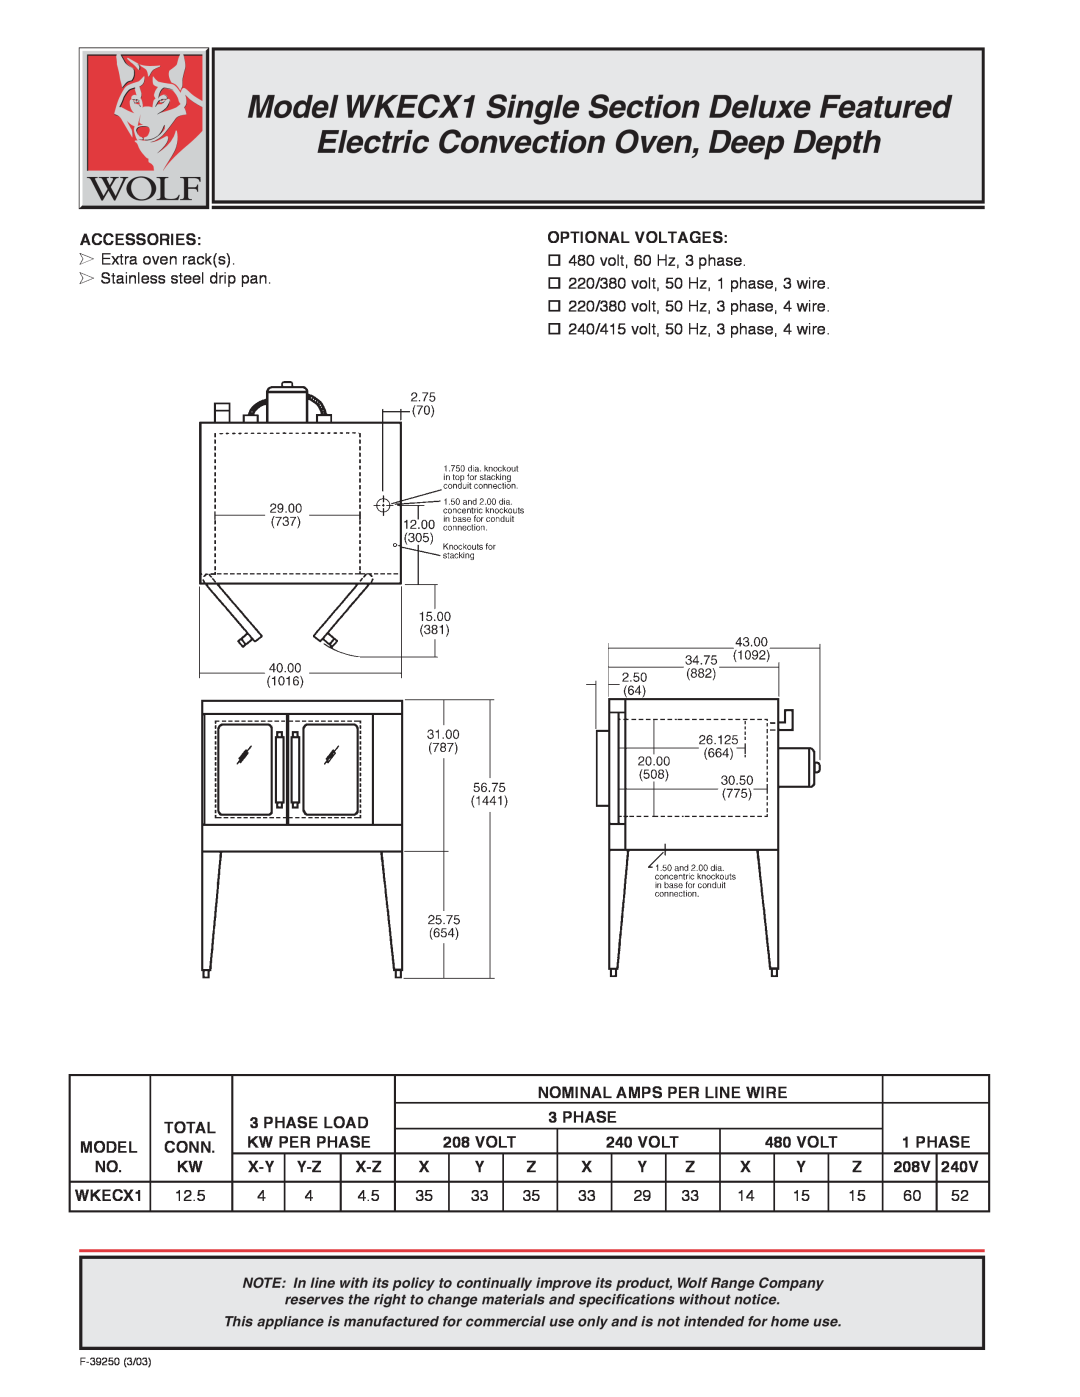 Wolf warranty Model WKECX1 Single Section Deluxe Featured, Electric Convection Oven, Deep Depth 